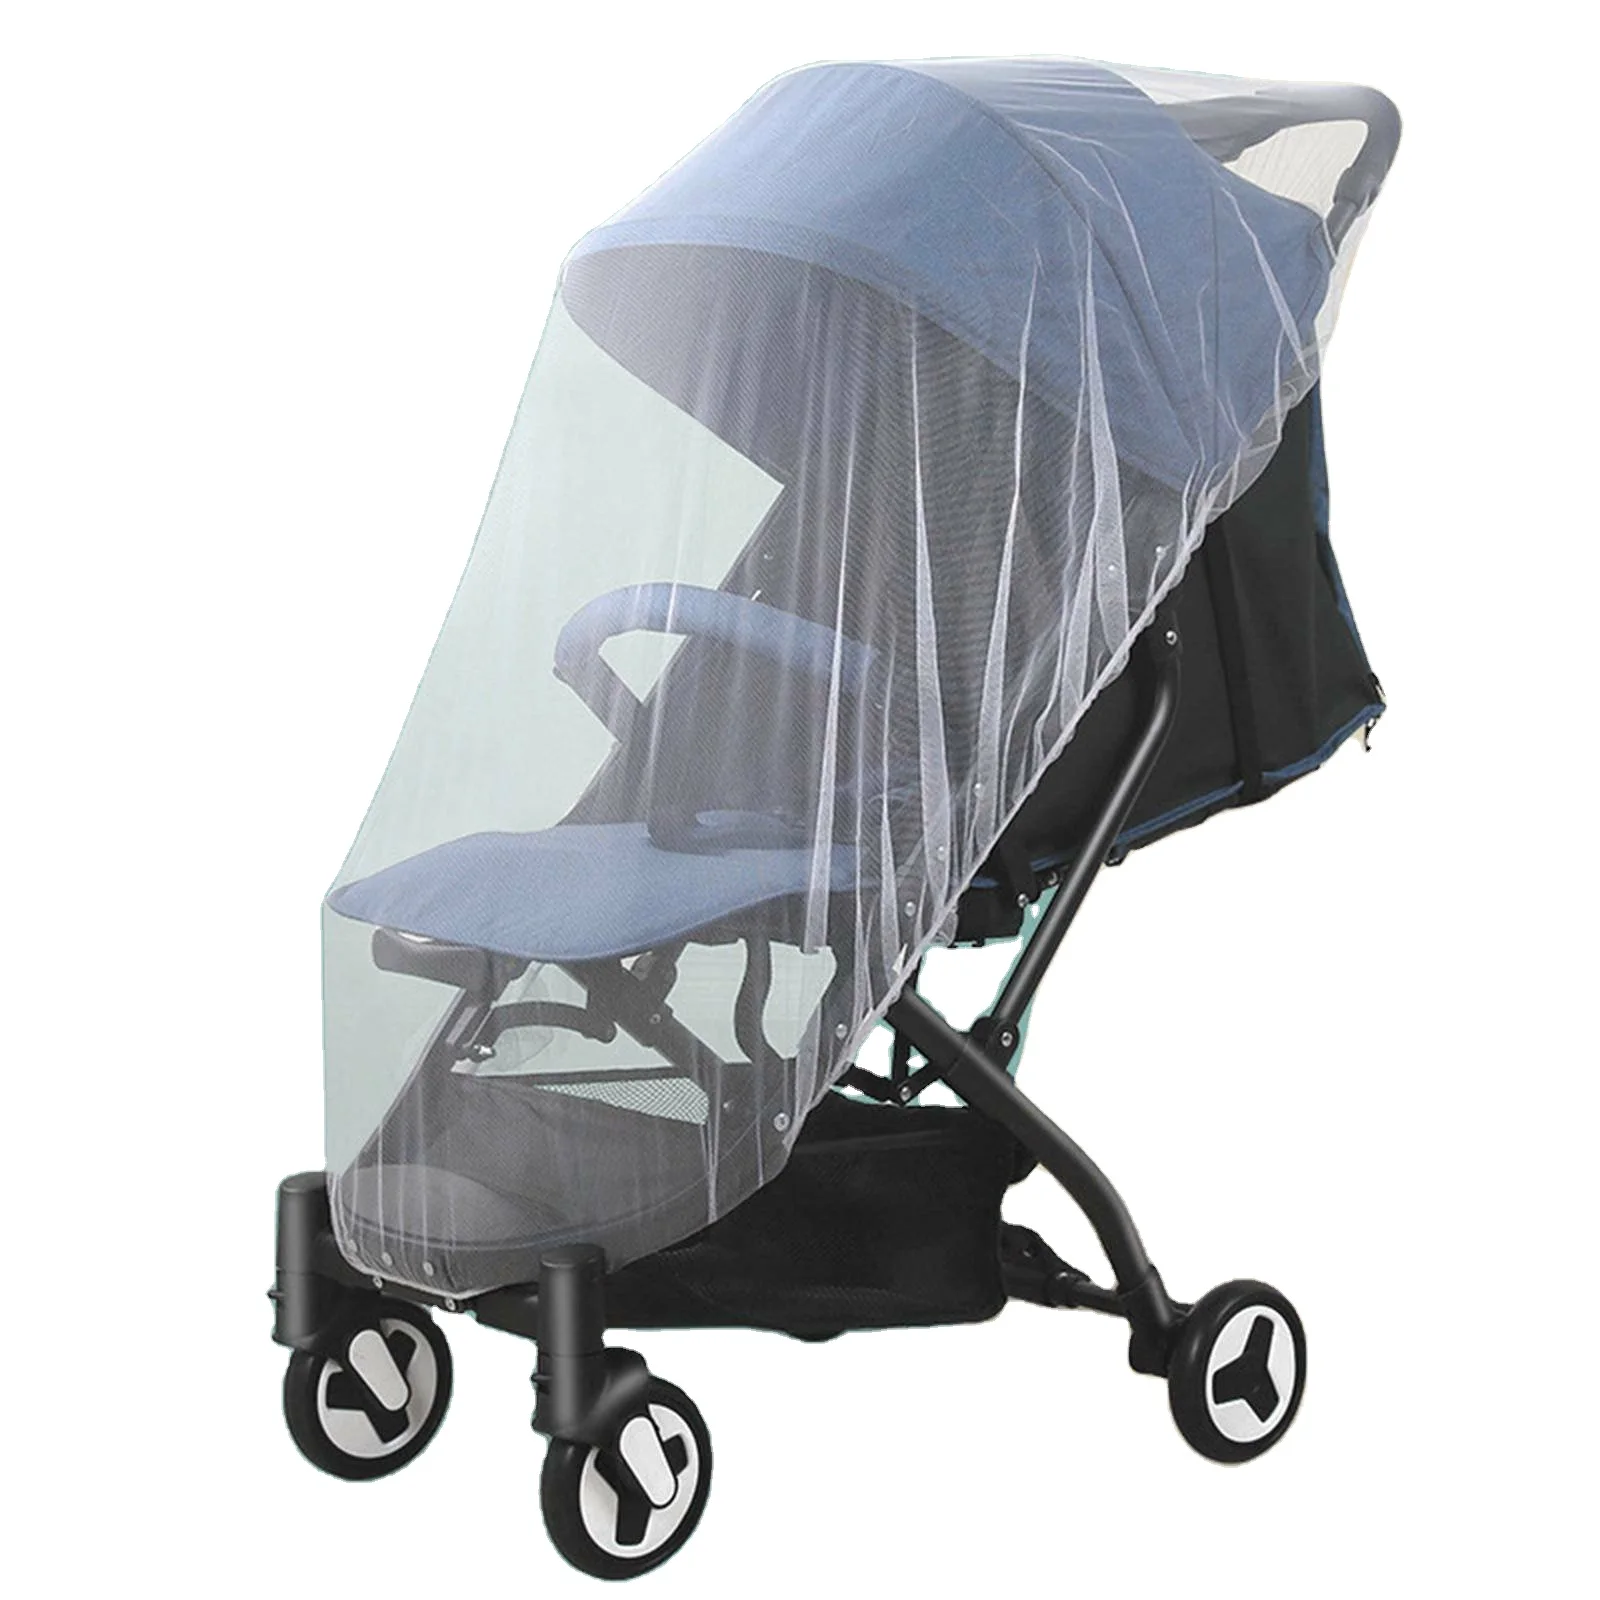 Baby Stroller Pushchair Mosquito Insect Net cover 